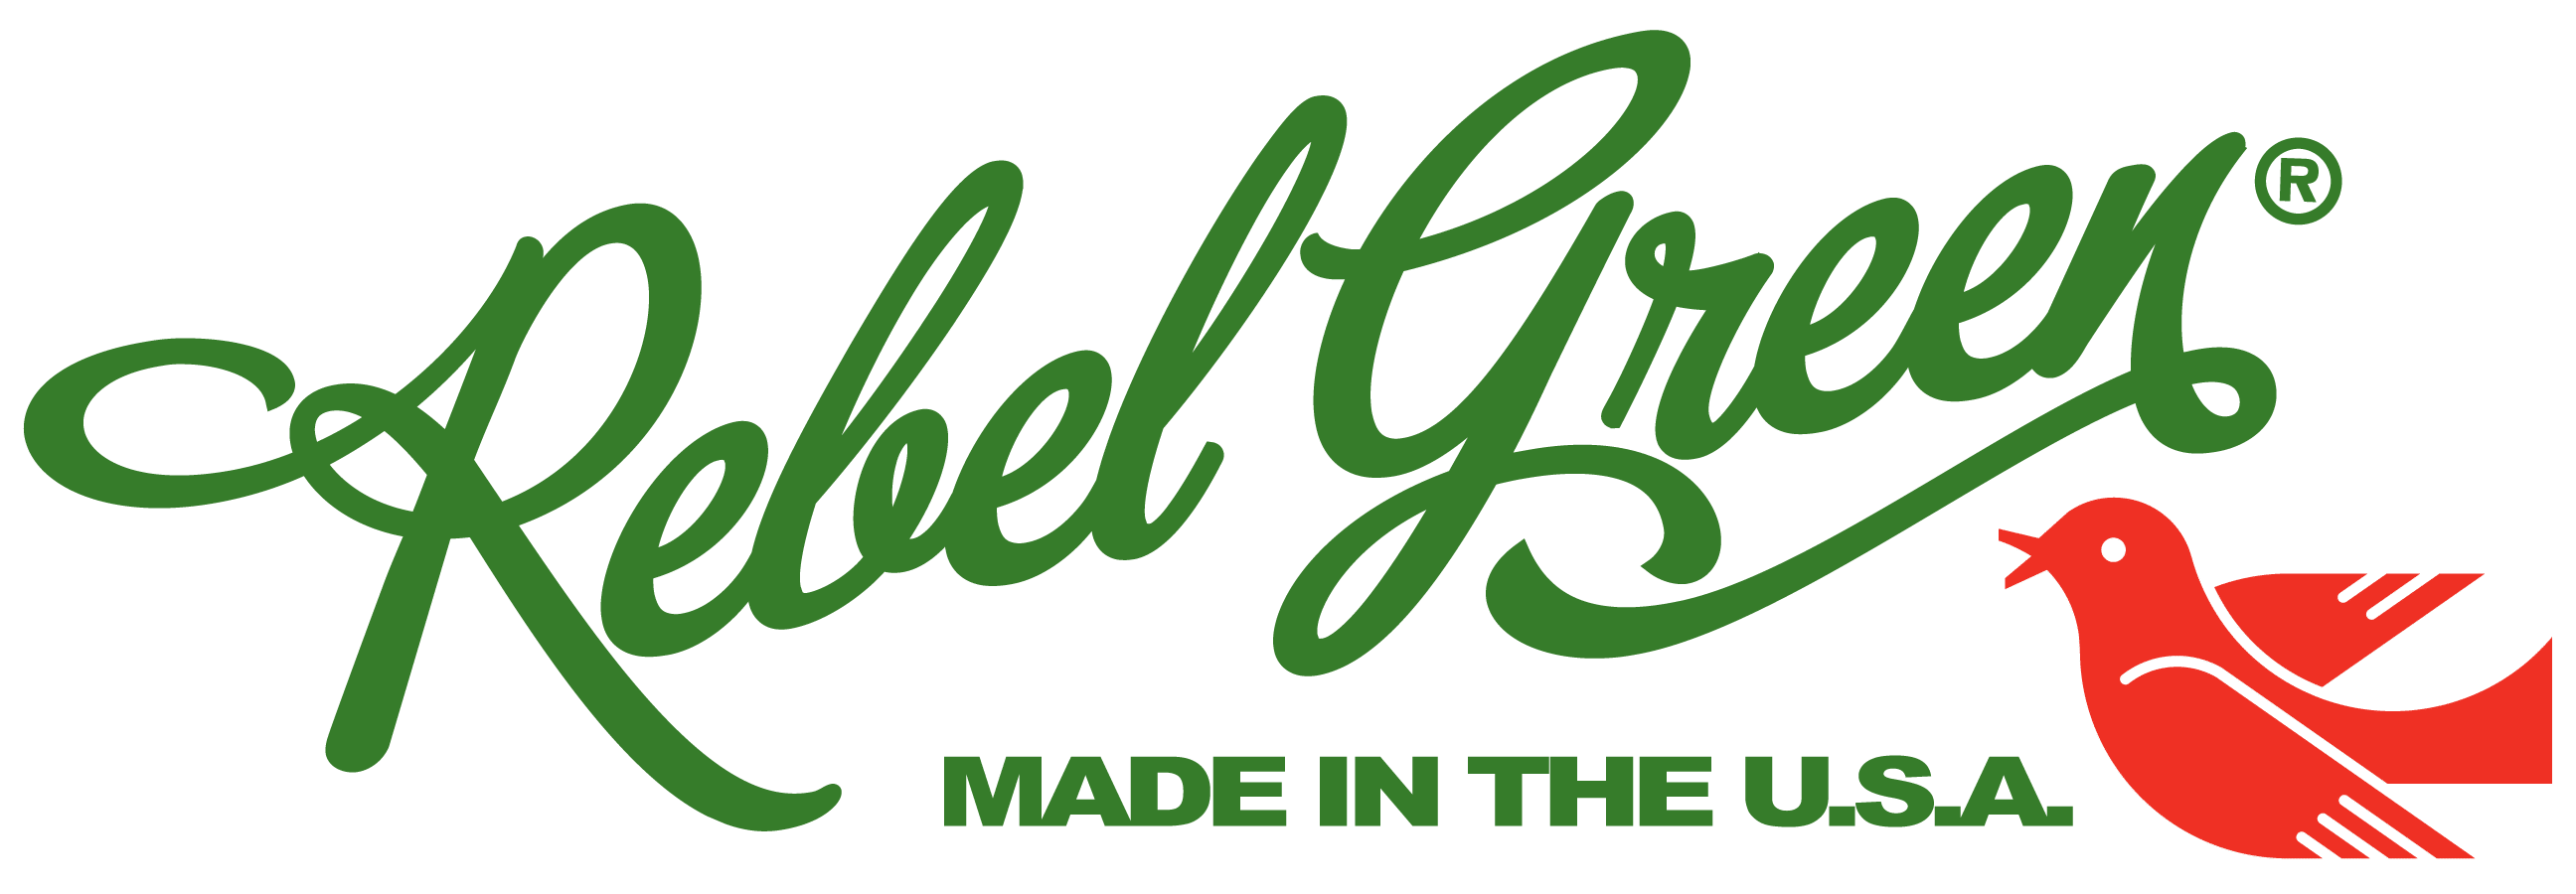 Green U Logo - Home - Rebel Green: Eco-Friendly Products Responsibly Made in the U.S.A.